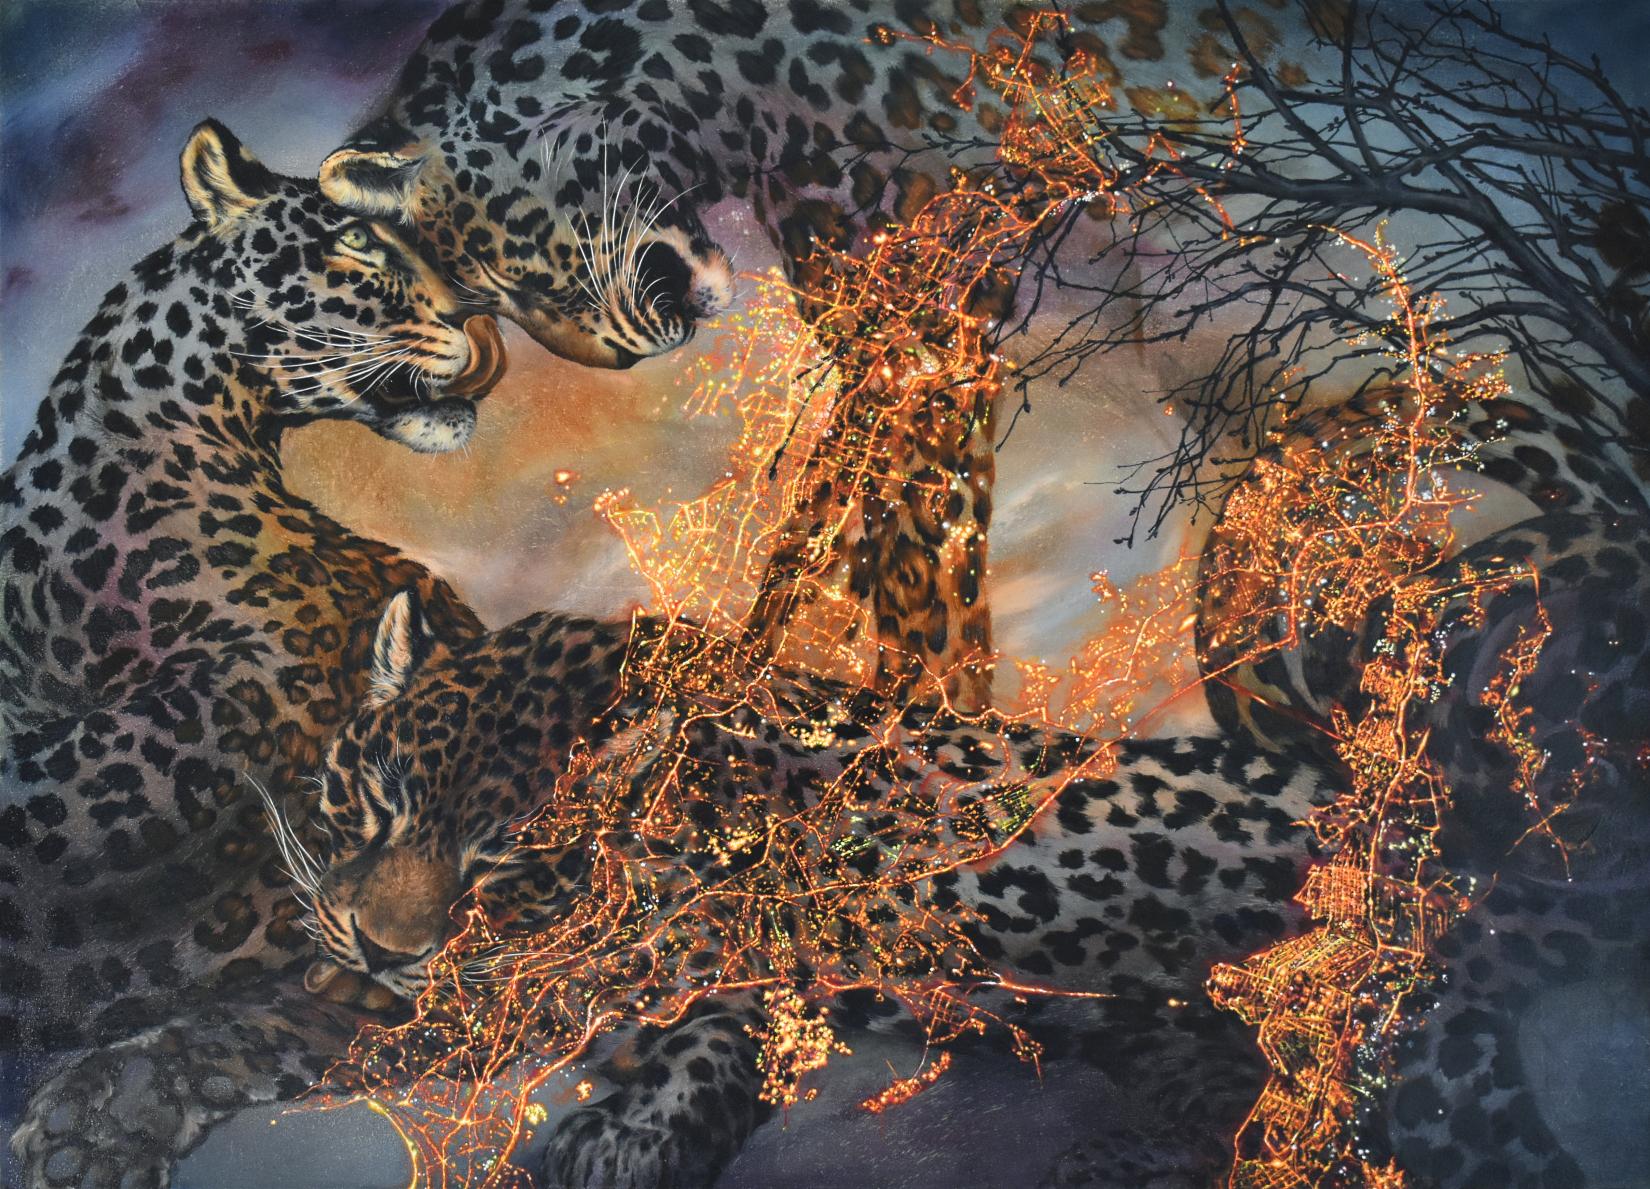 Francine Fox Animal Painting - Leopards of Mumbai, Leopard, Animal, Trees, Gray, Gold Nature Inspired Painting